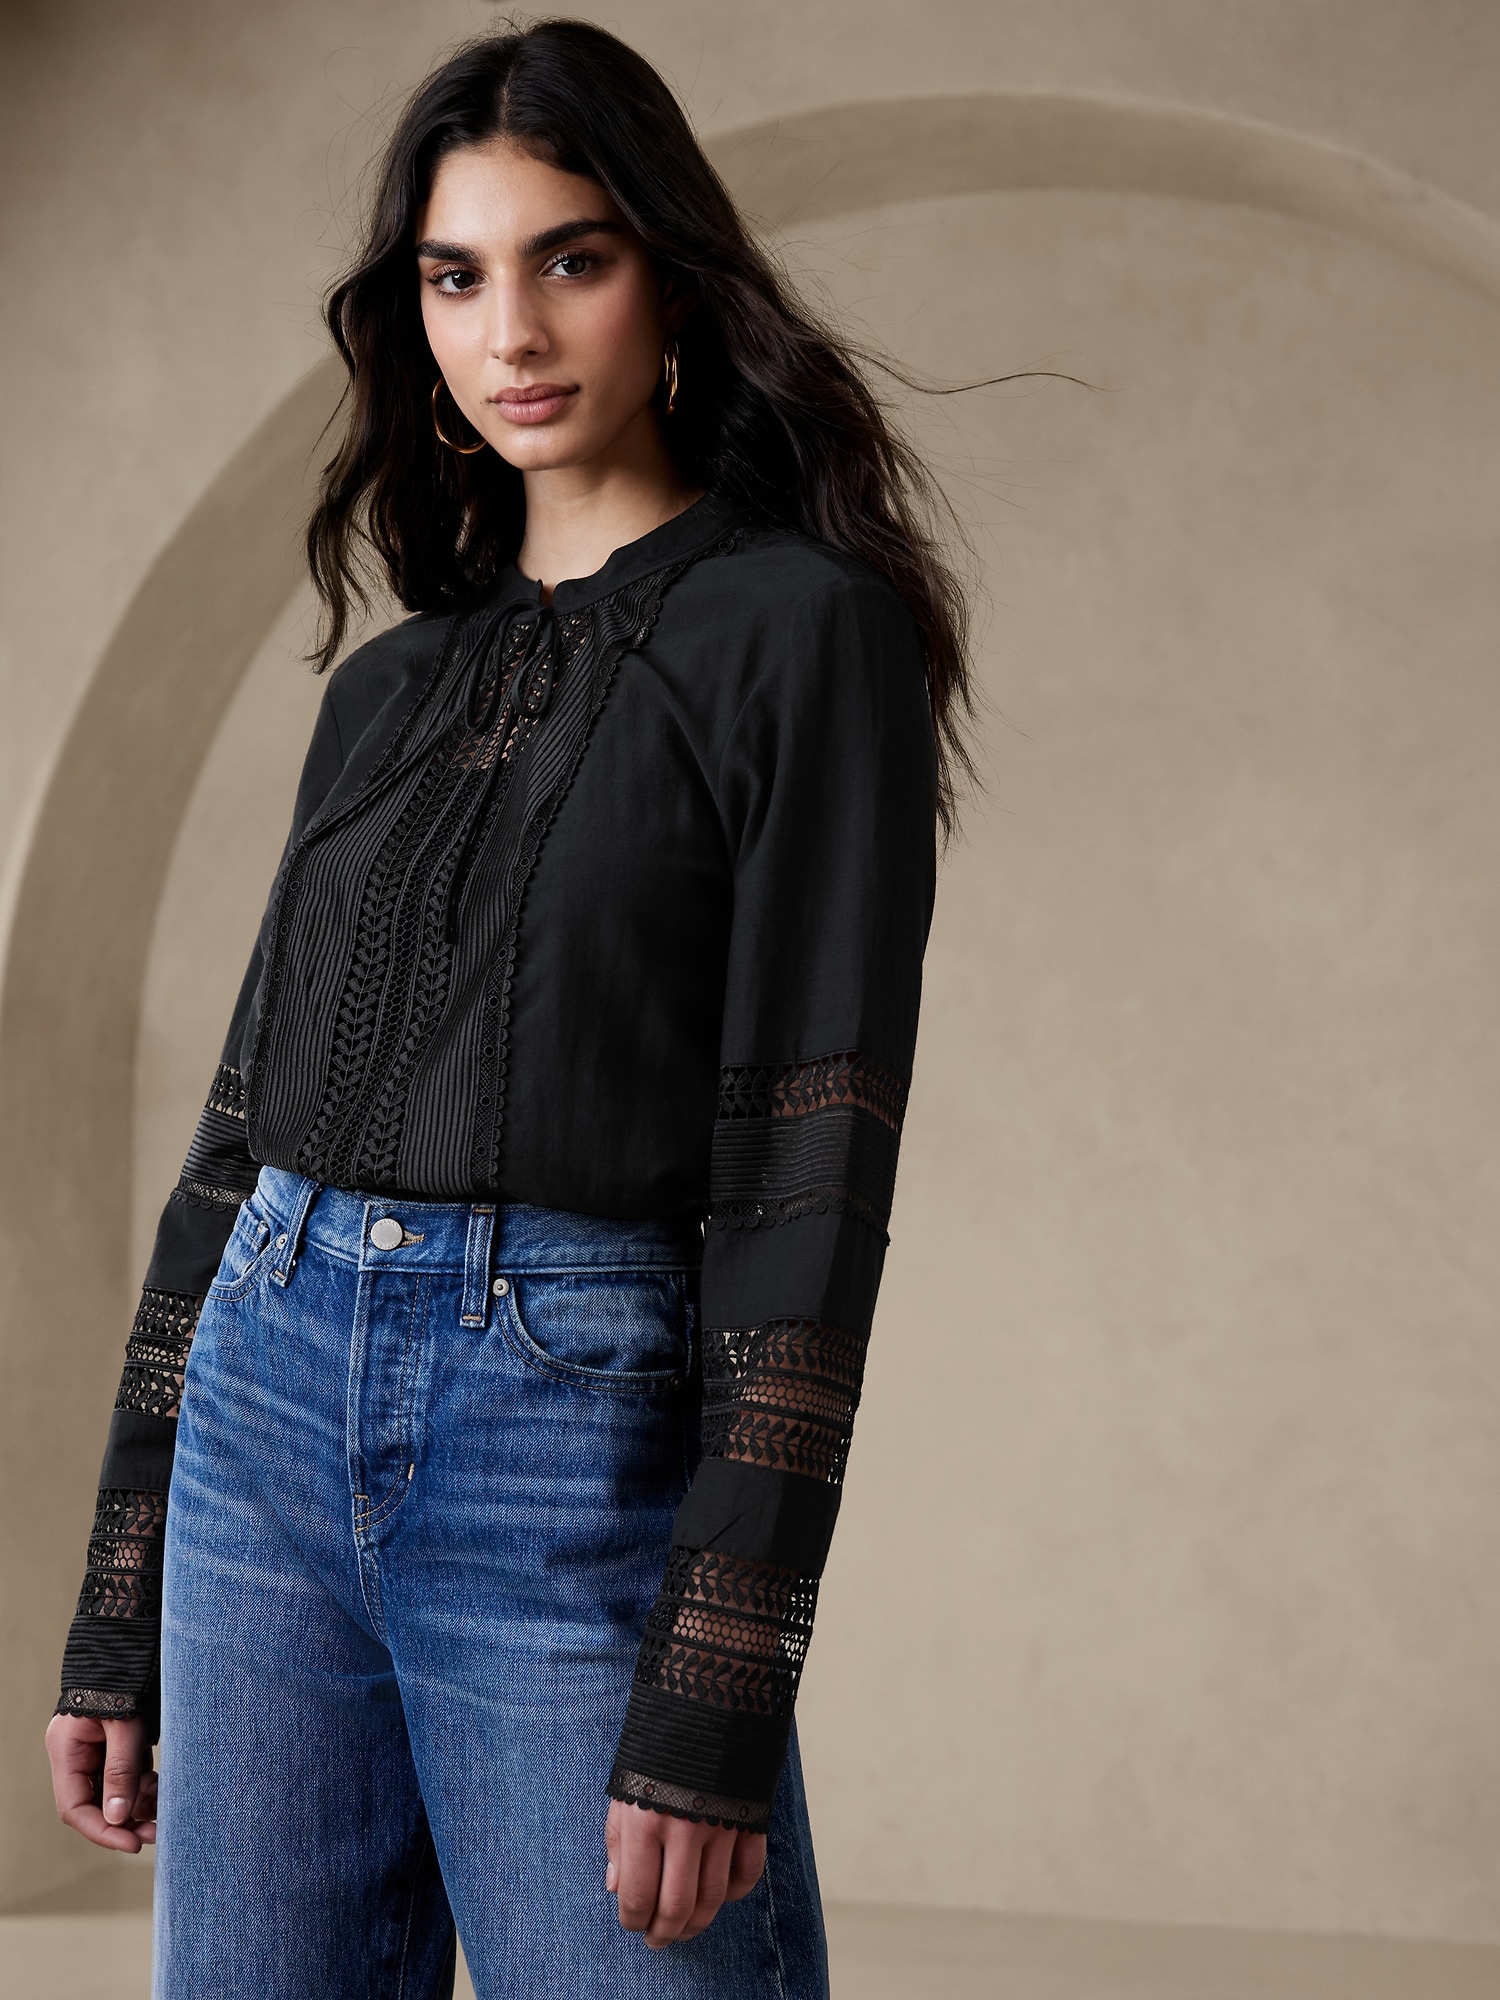 Black Lace Long Sleeve Tie Front Shirt, Tops